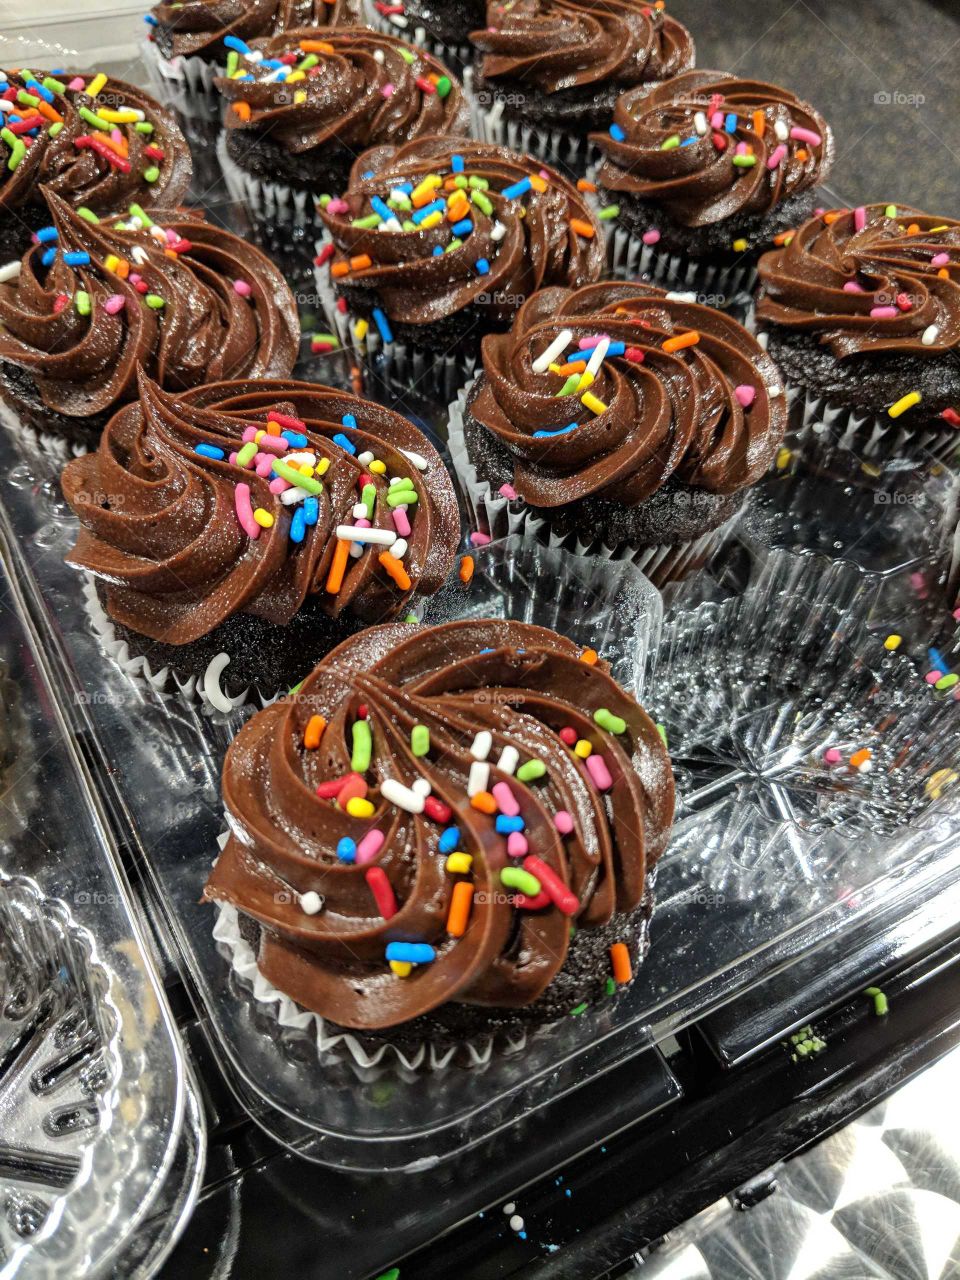 Cupcakes Missing One